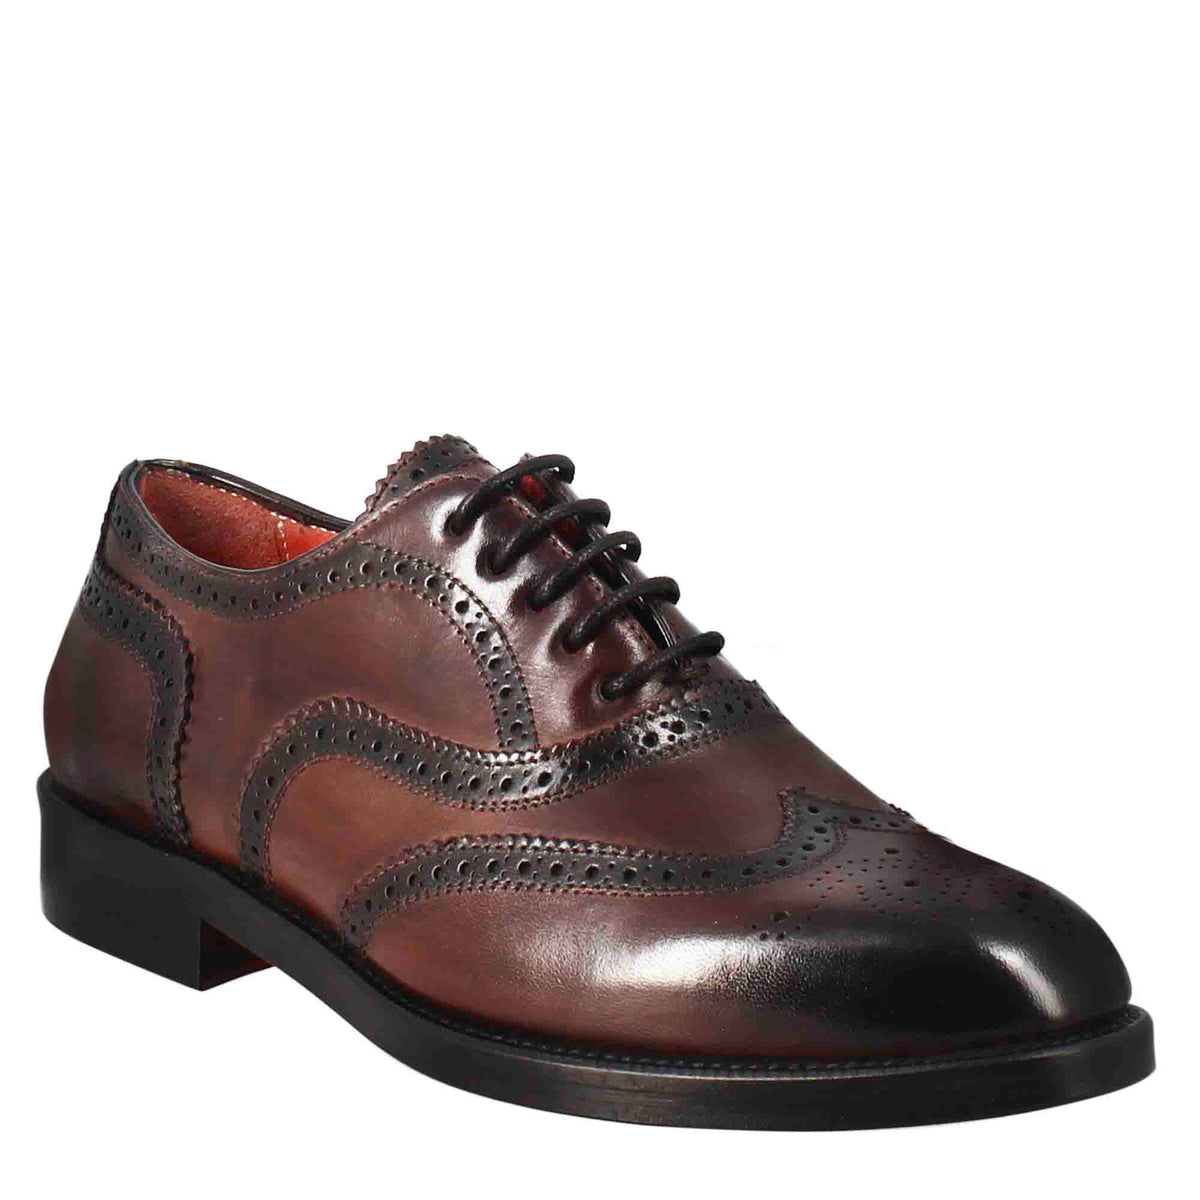 Women's brogue effect brogue shoes in burgundy leather